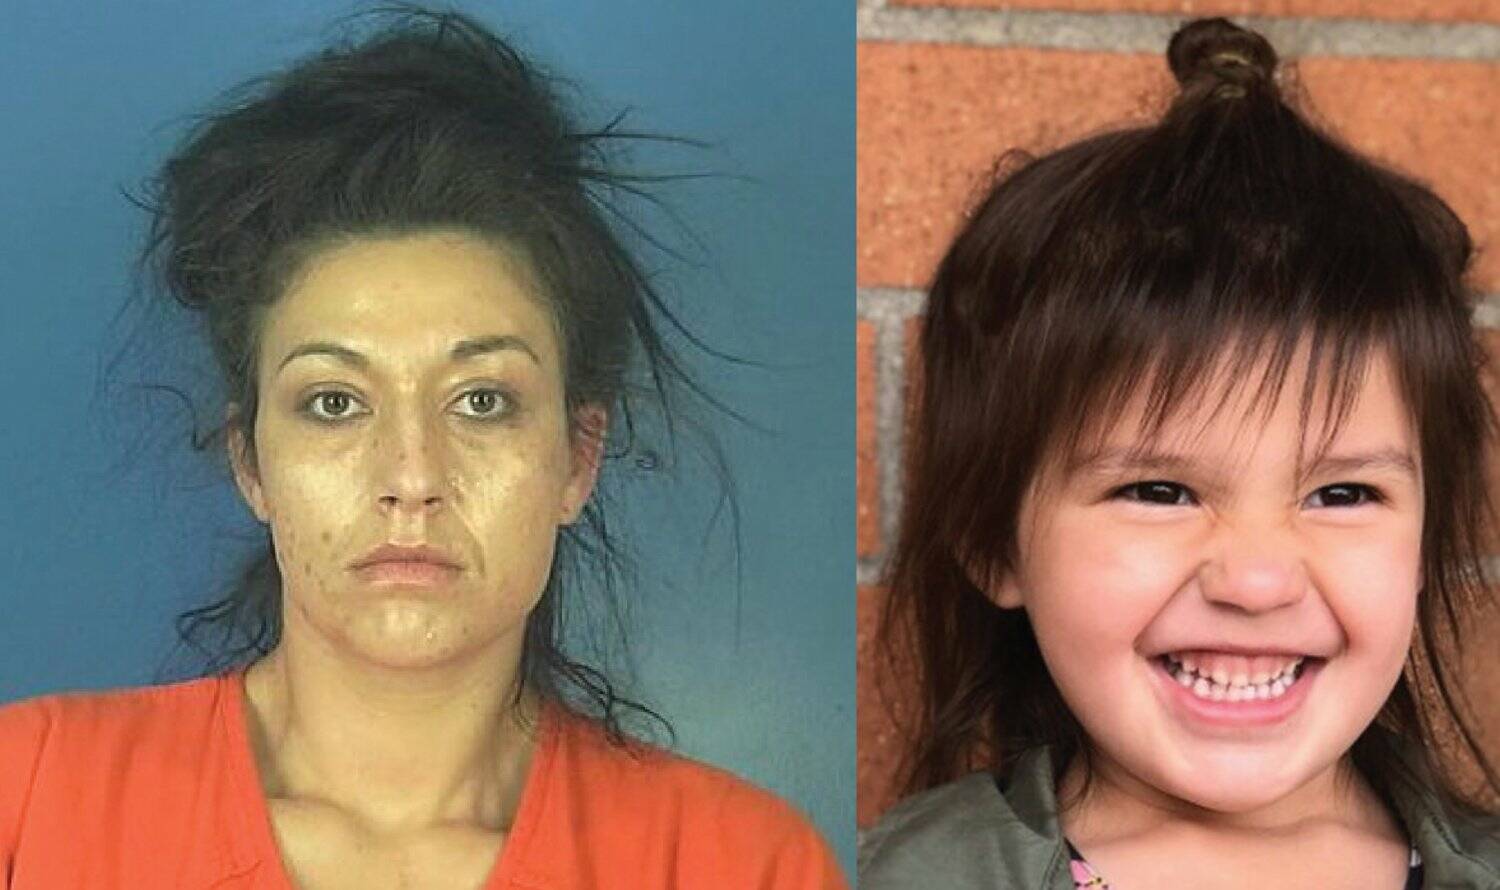 Daily World file photo
Jordan Bowers (left) was arrested Sunday, Jan. 15, on four counts of identity theft immediately after being released for completing a nine-month sentence for child endangerment, unrelated to her missing six-year-old daughter Oakley Carlson (right). Oakley has been officially declared missing since Dec. 6, 2021, but was last seen confirmed alive nine months prior to that date.